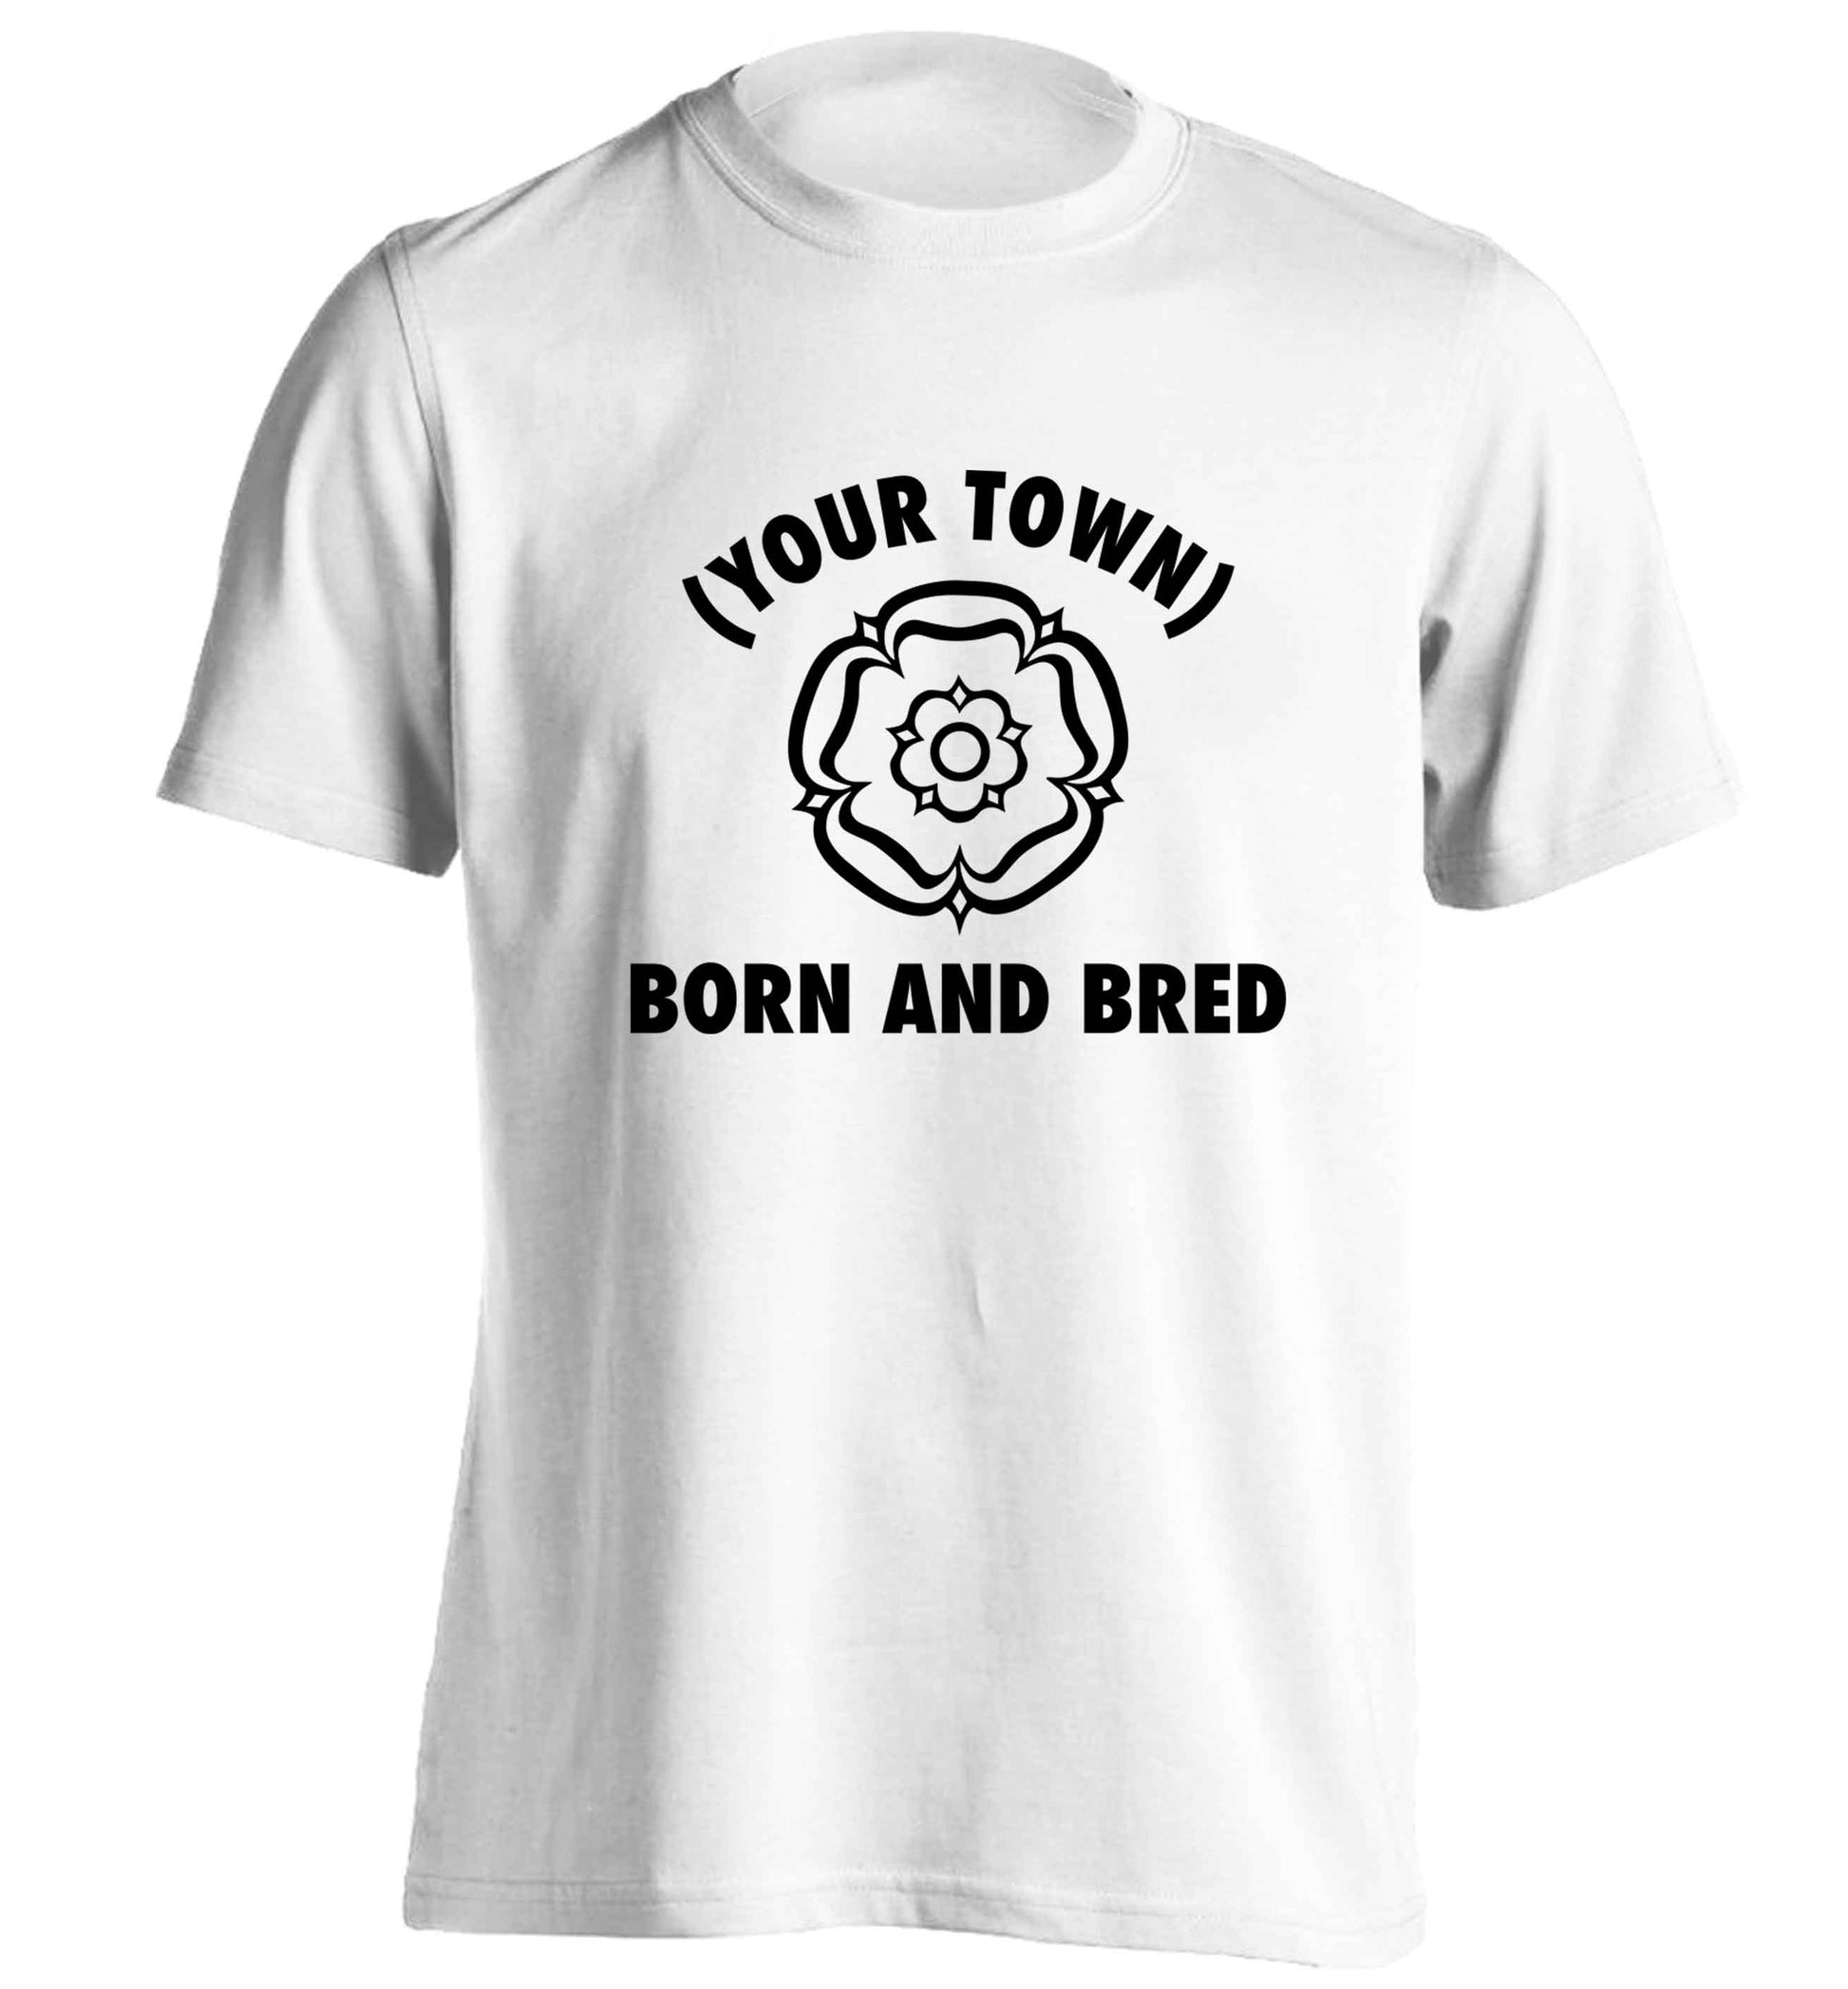 Personalised born and bred adults unisex white Tshirt 2XL